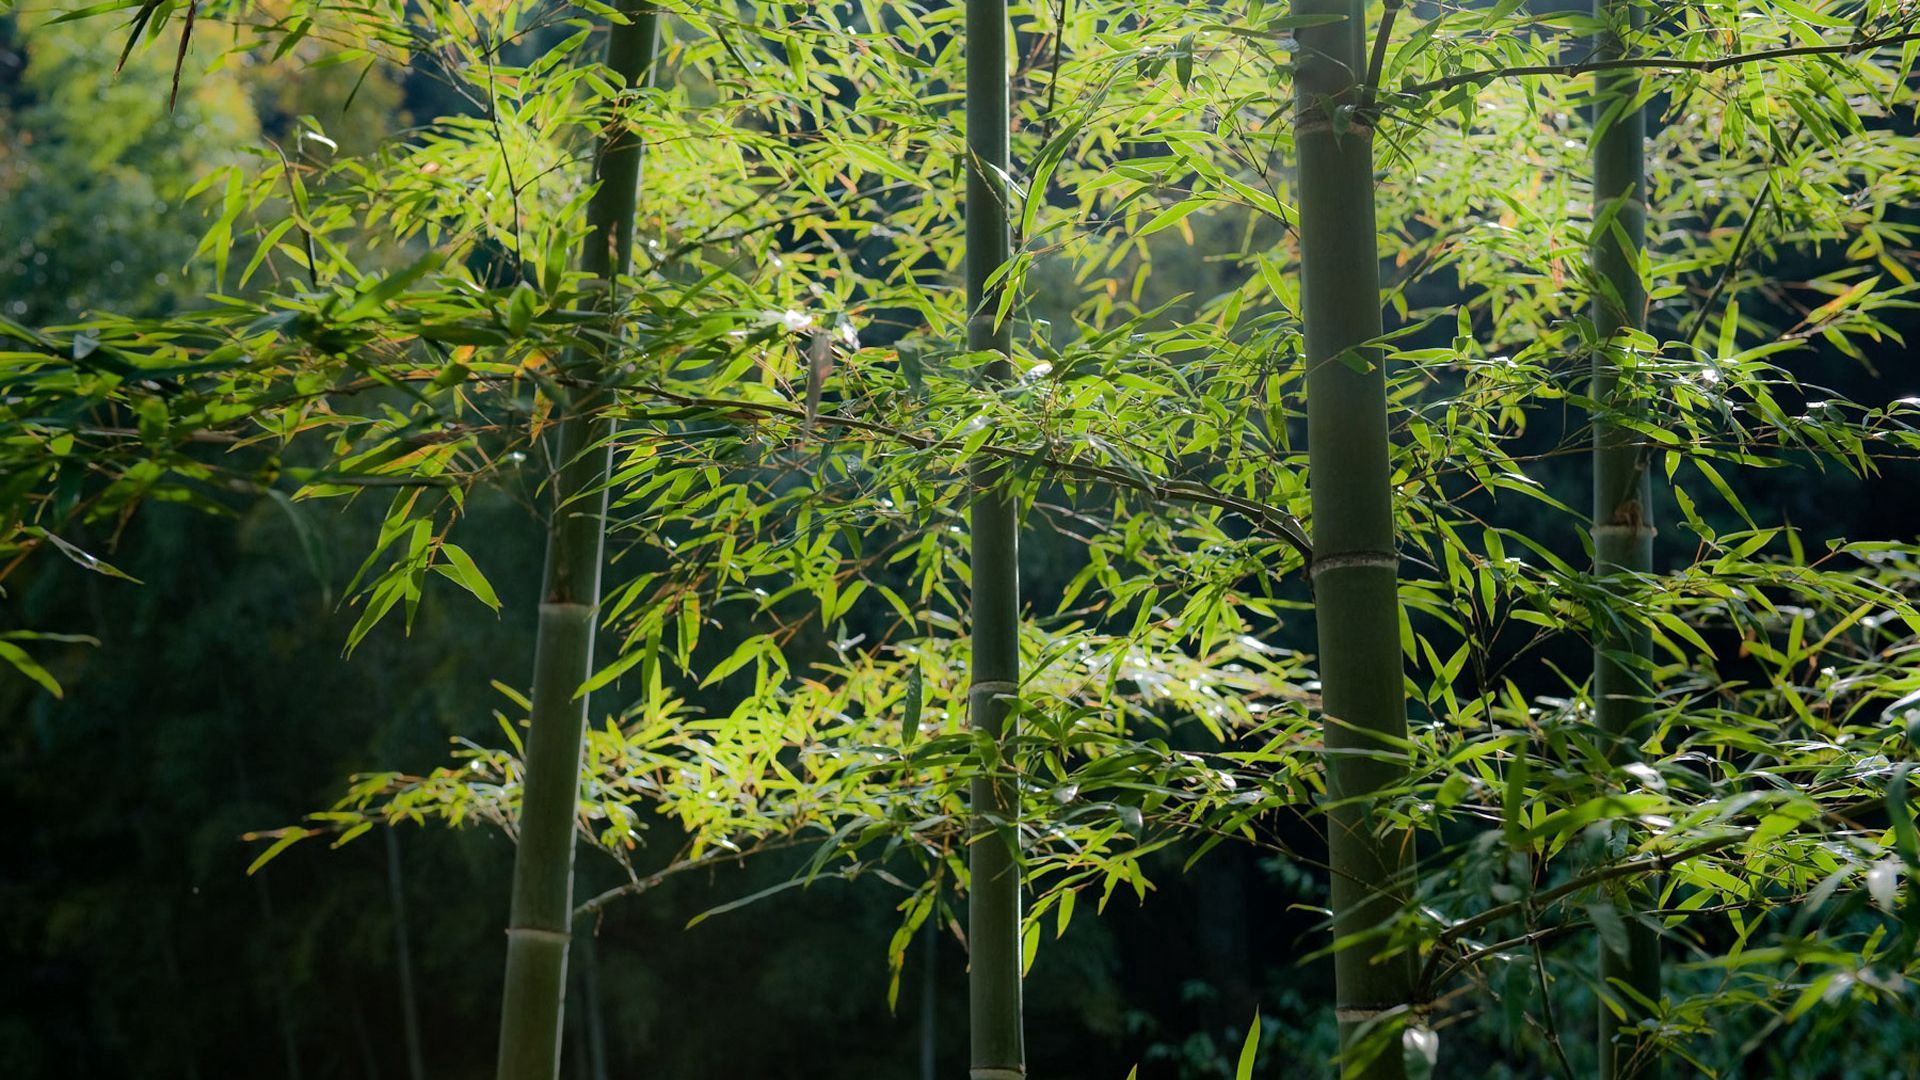 Download wallpaper 1920x1080 bamboo, wood, stalks, tranquillity full hd,  hdtv, fhd, 1080p hd background